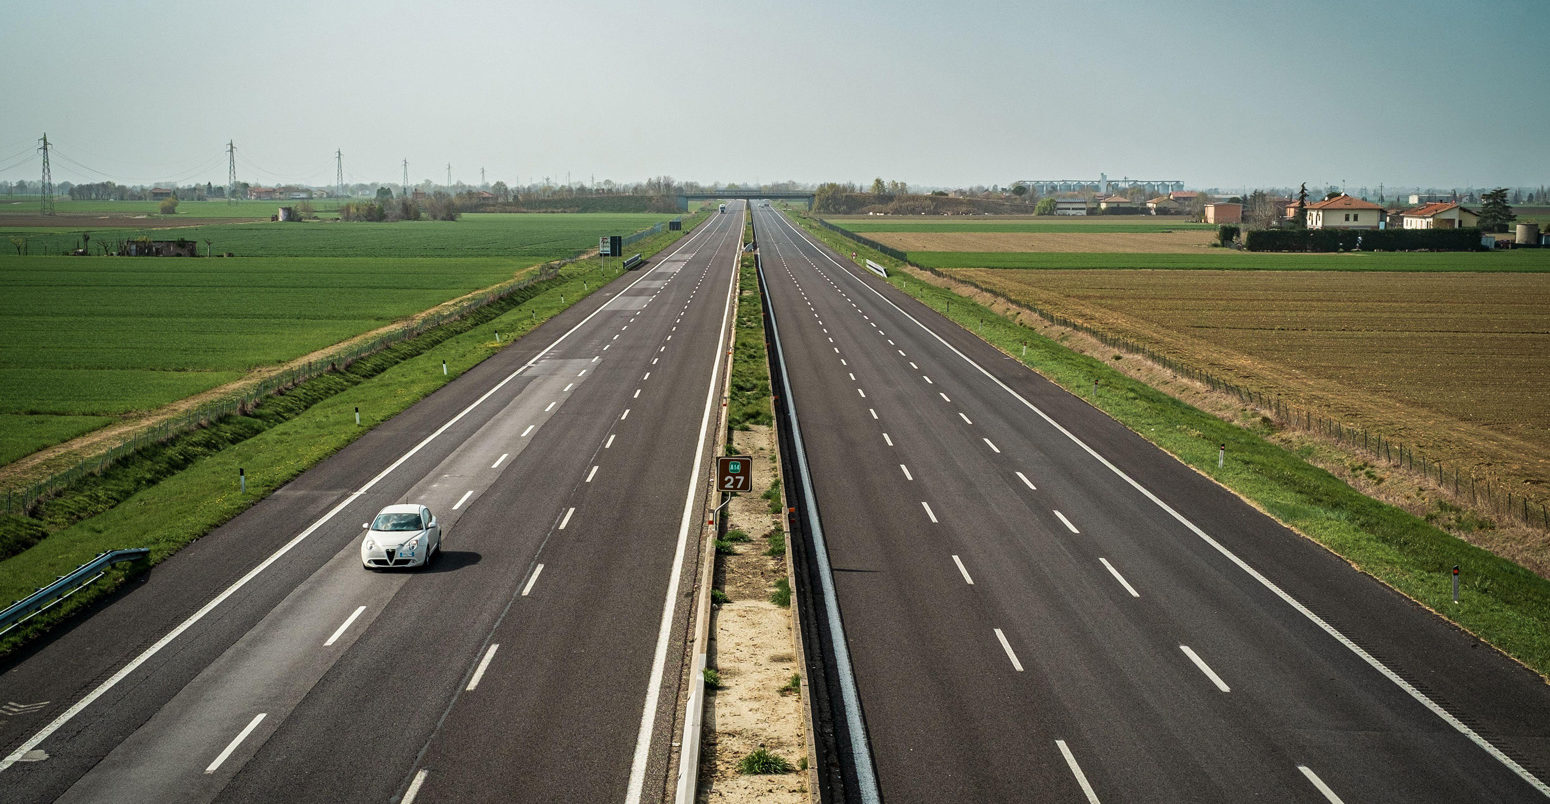 3pm on the A14 highway in Bolgna, Italy. 28 March 2020. Credit: Giorgio Morara / Alamy Stock Photo